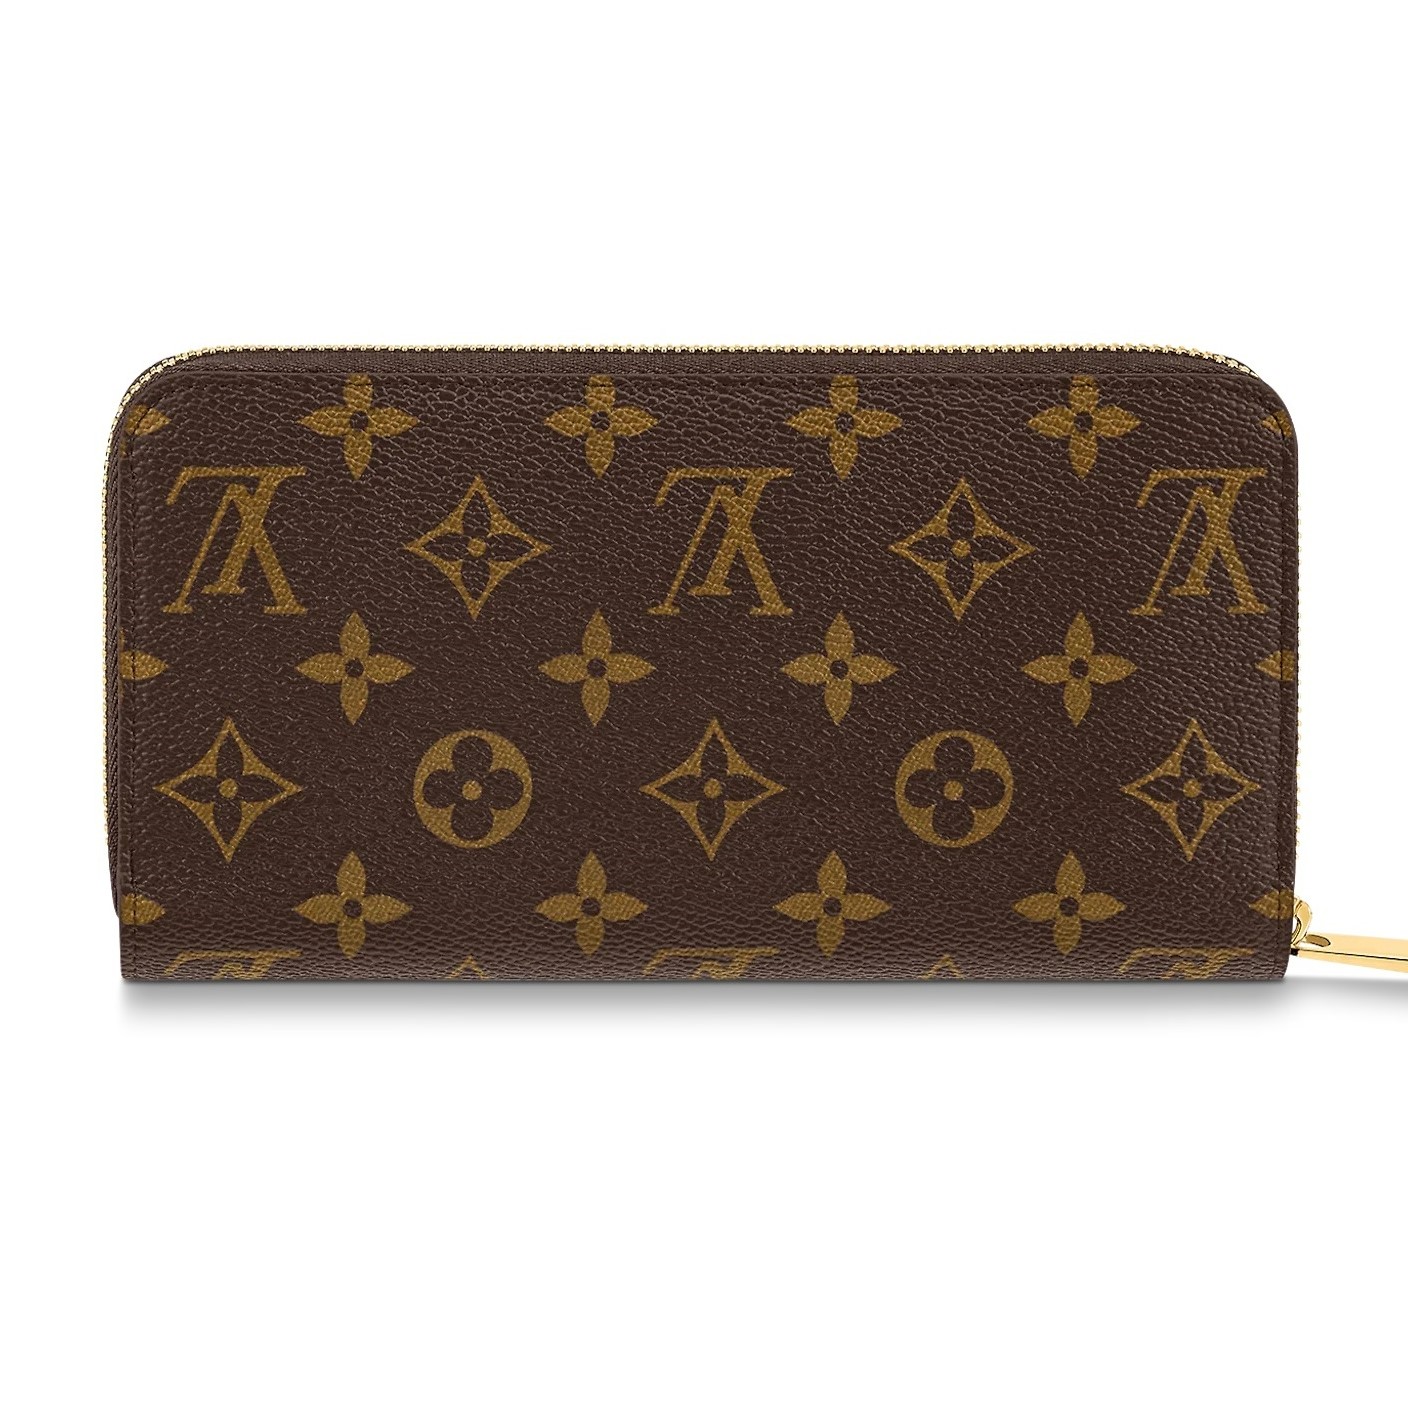 VÍ NỮ DÀI HỌA TIẾT LIMITED LV LOUIS VUITTON ZIPPY WALLET MONOGRAM CANVAS WALLETS AND SMALL LEATHER GOODS M81630 2